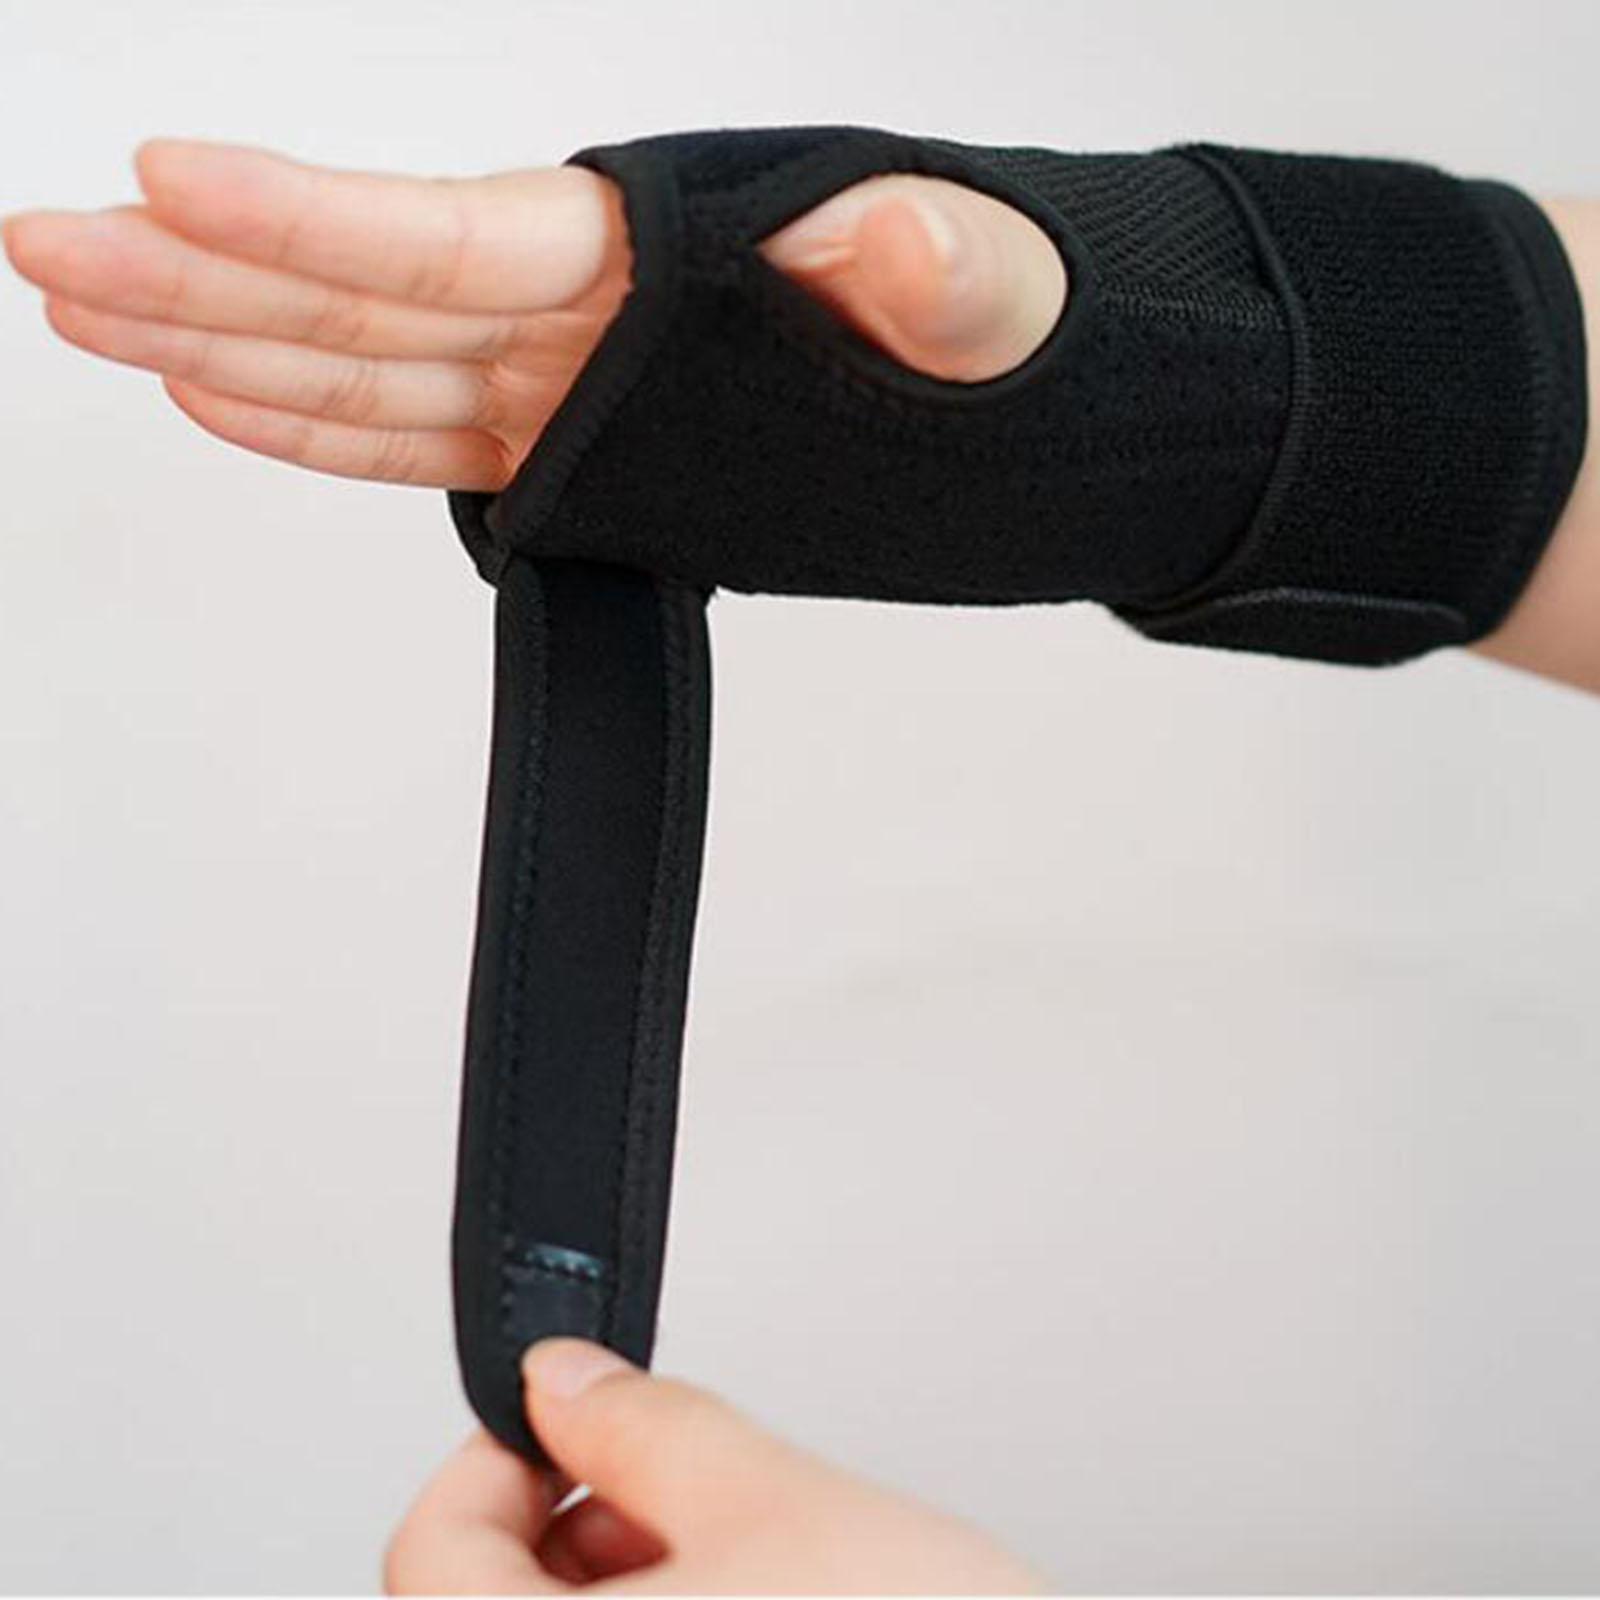 Wrist Support Injury Recovery Brace for Sport Injuries Training M Right hand